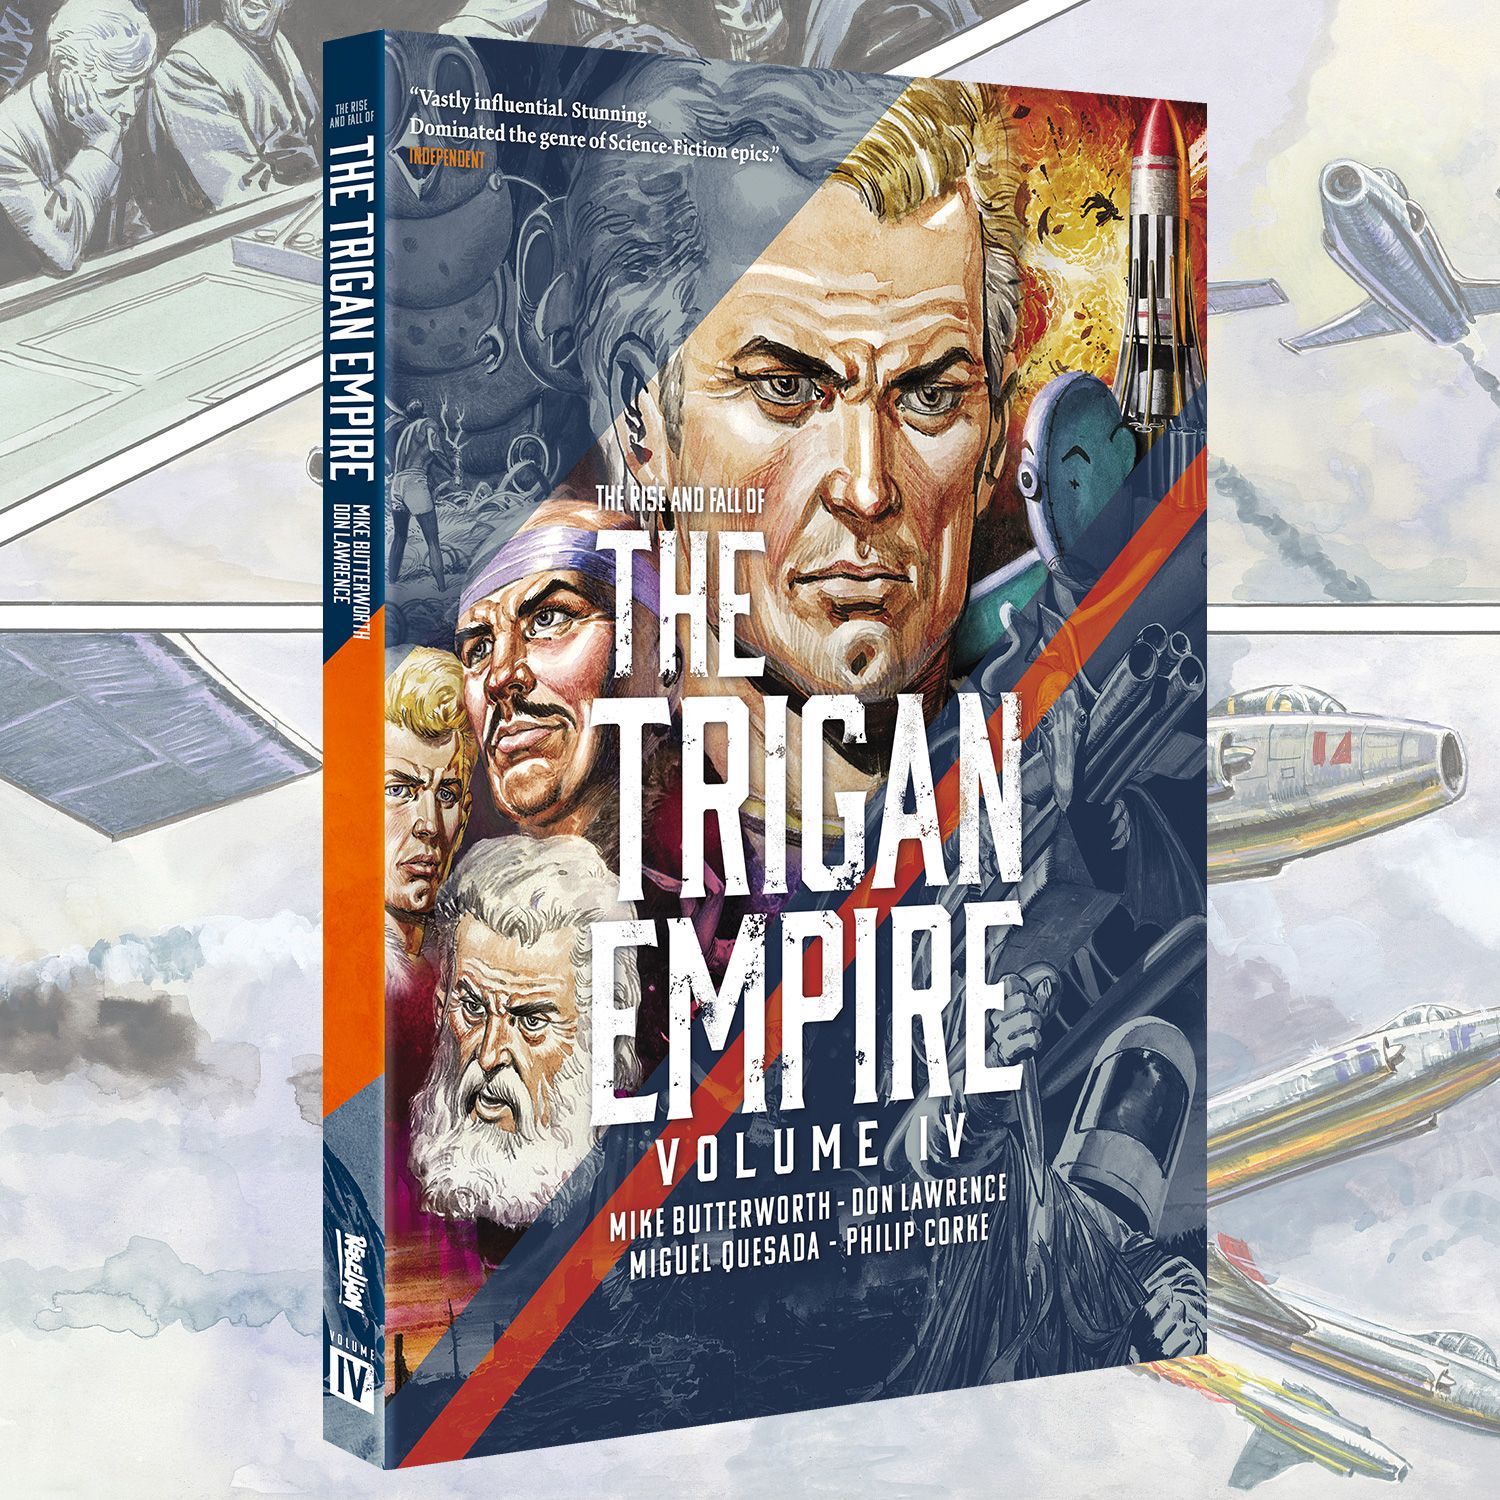 The Rise and Fall of the Trigan Empire Vol.4 – out now!